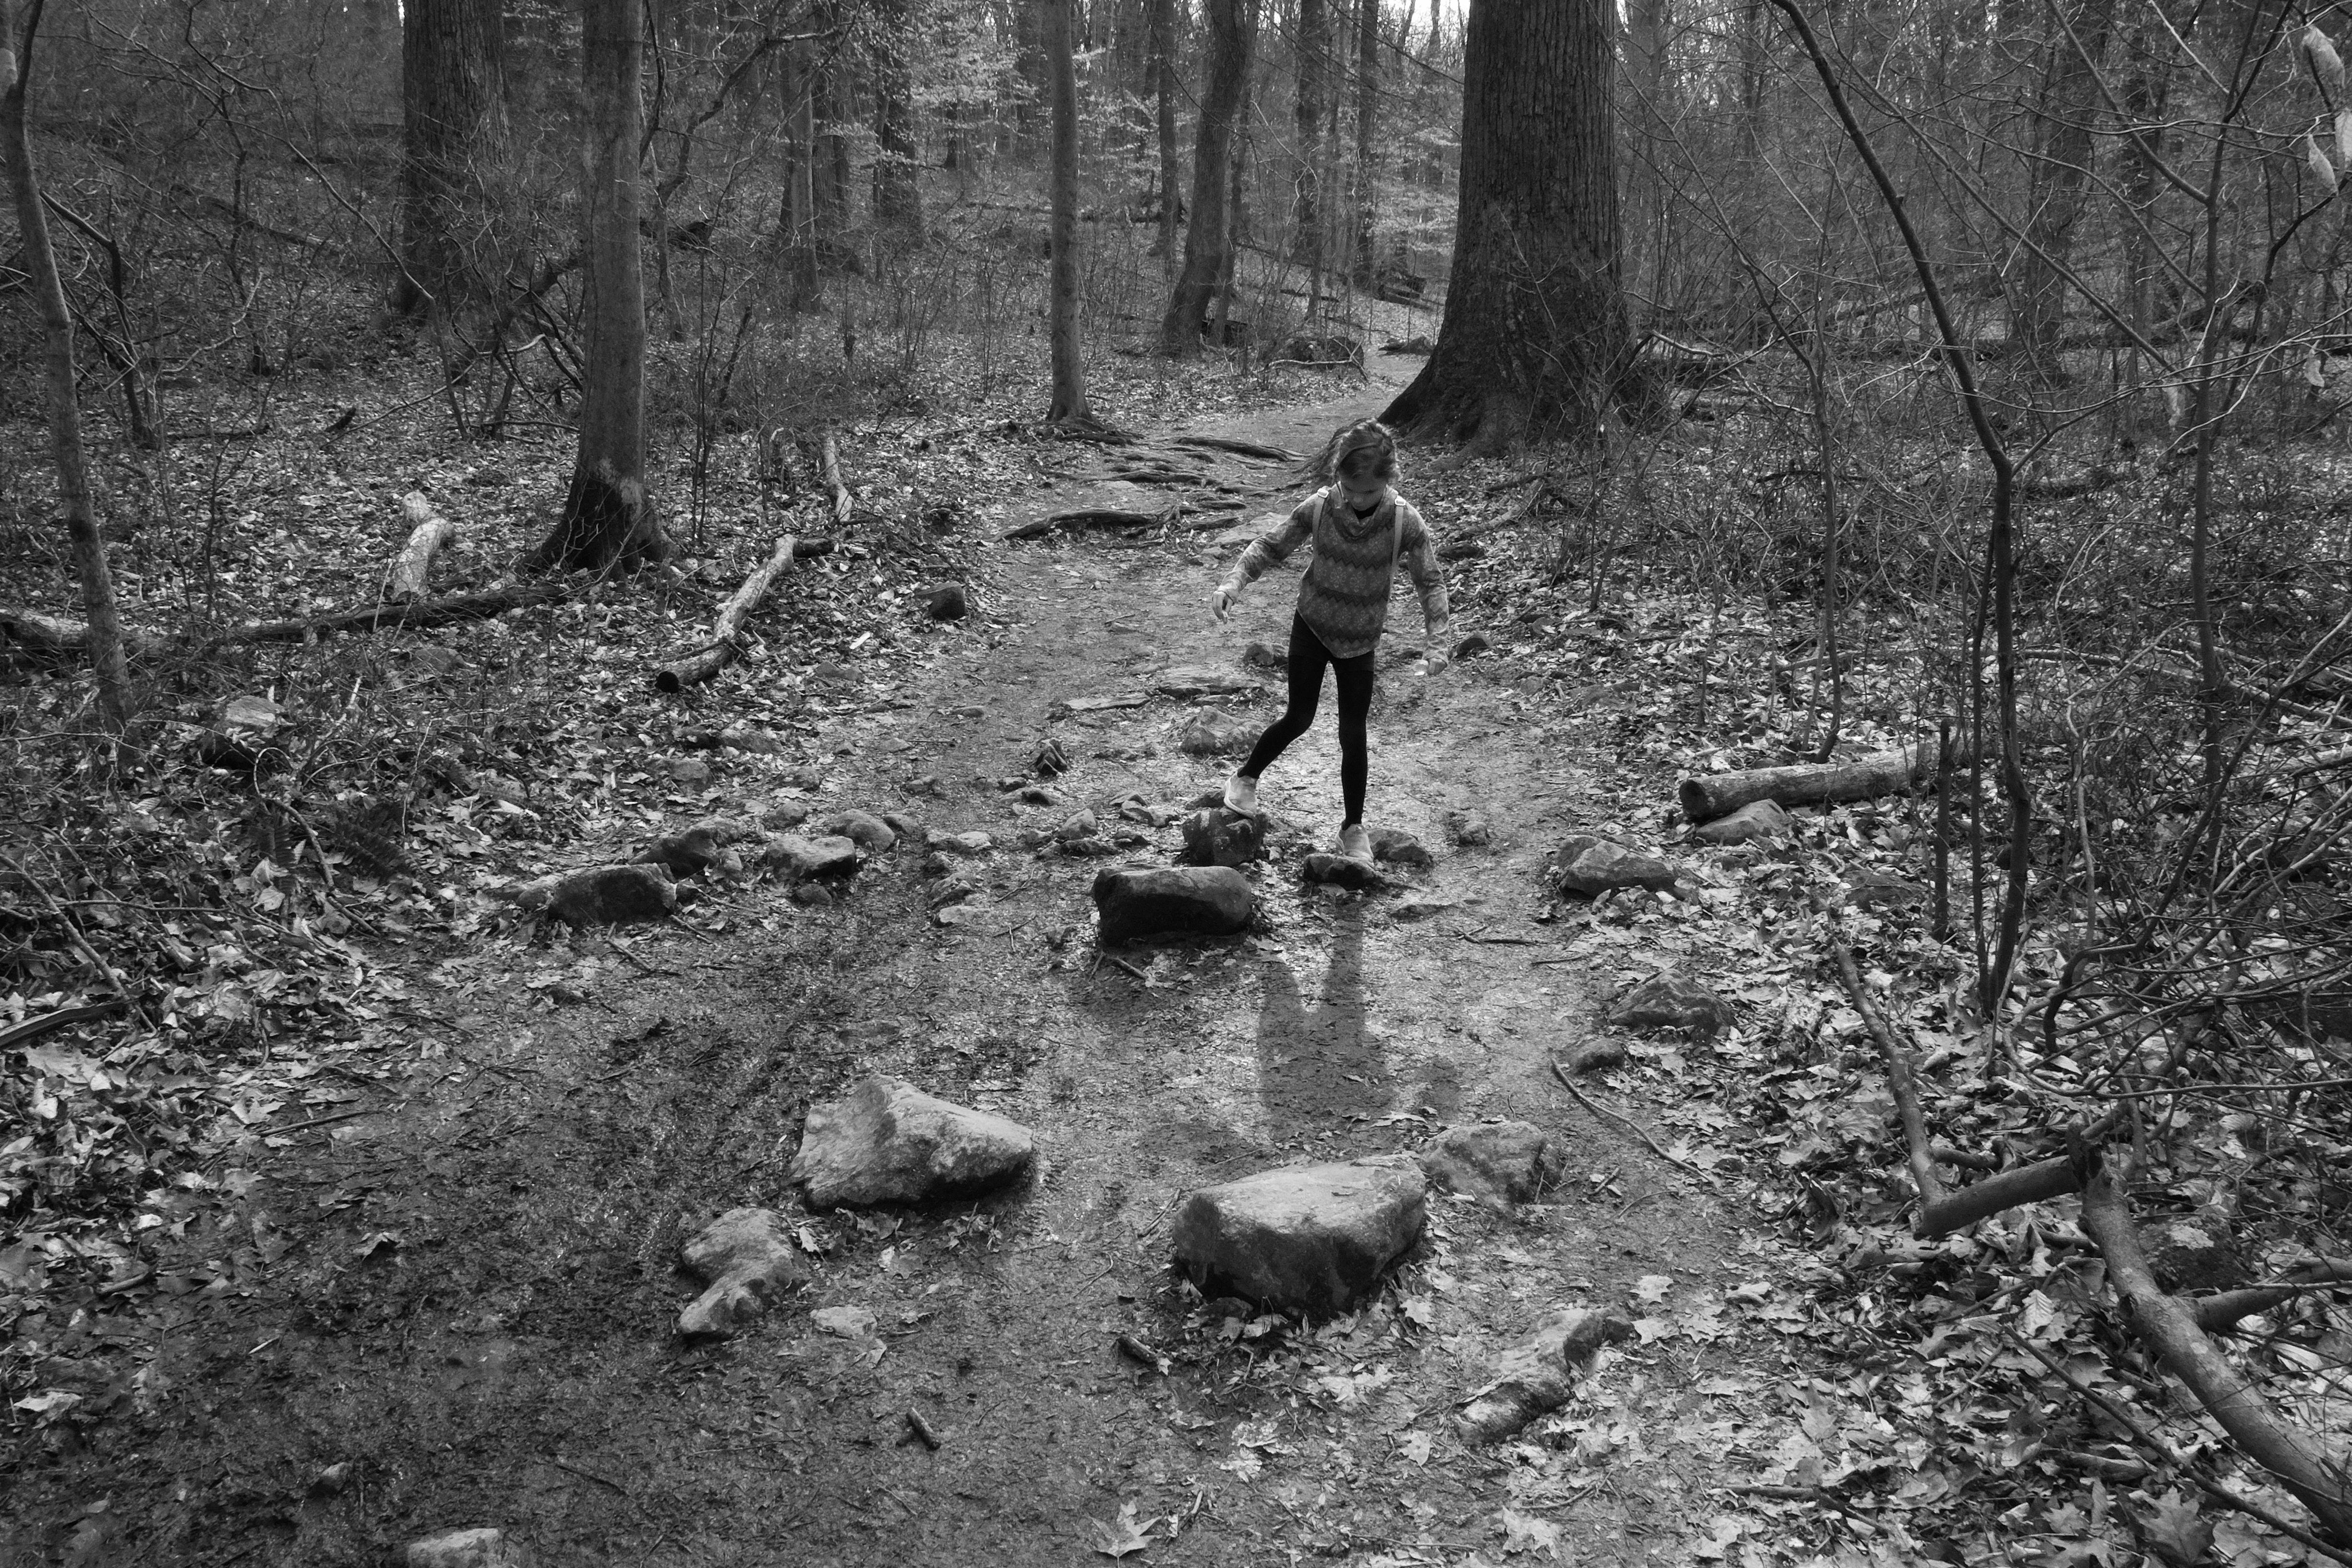 My daughter makes her way down the trail. She's stepping over some rocks and much in the middle of the trail, with forest on either side.